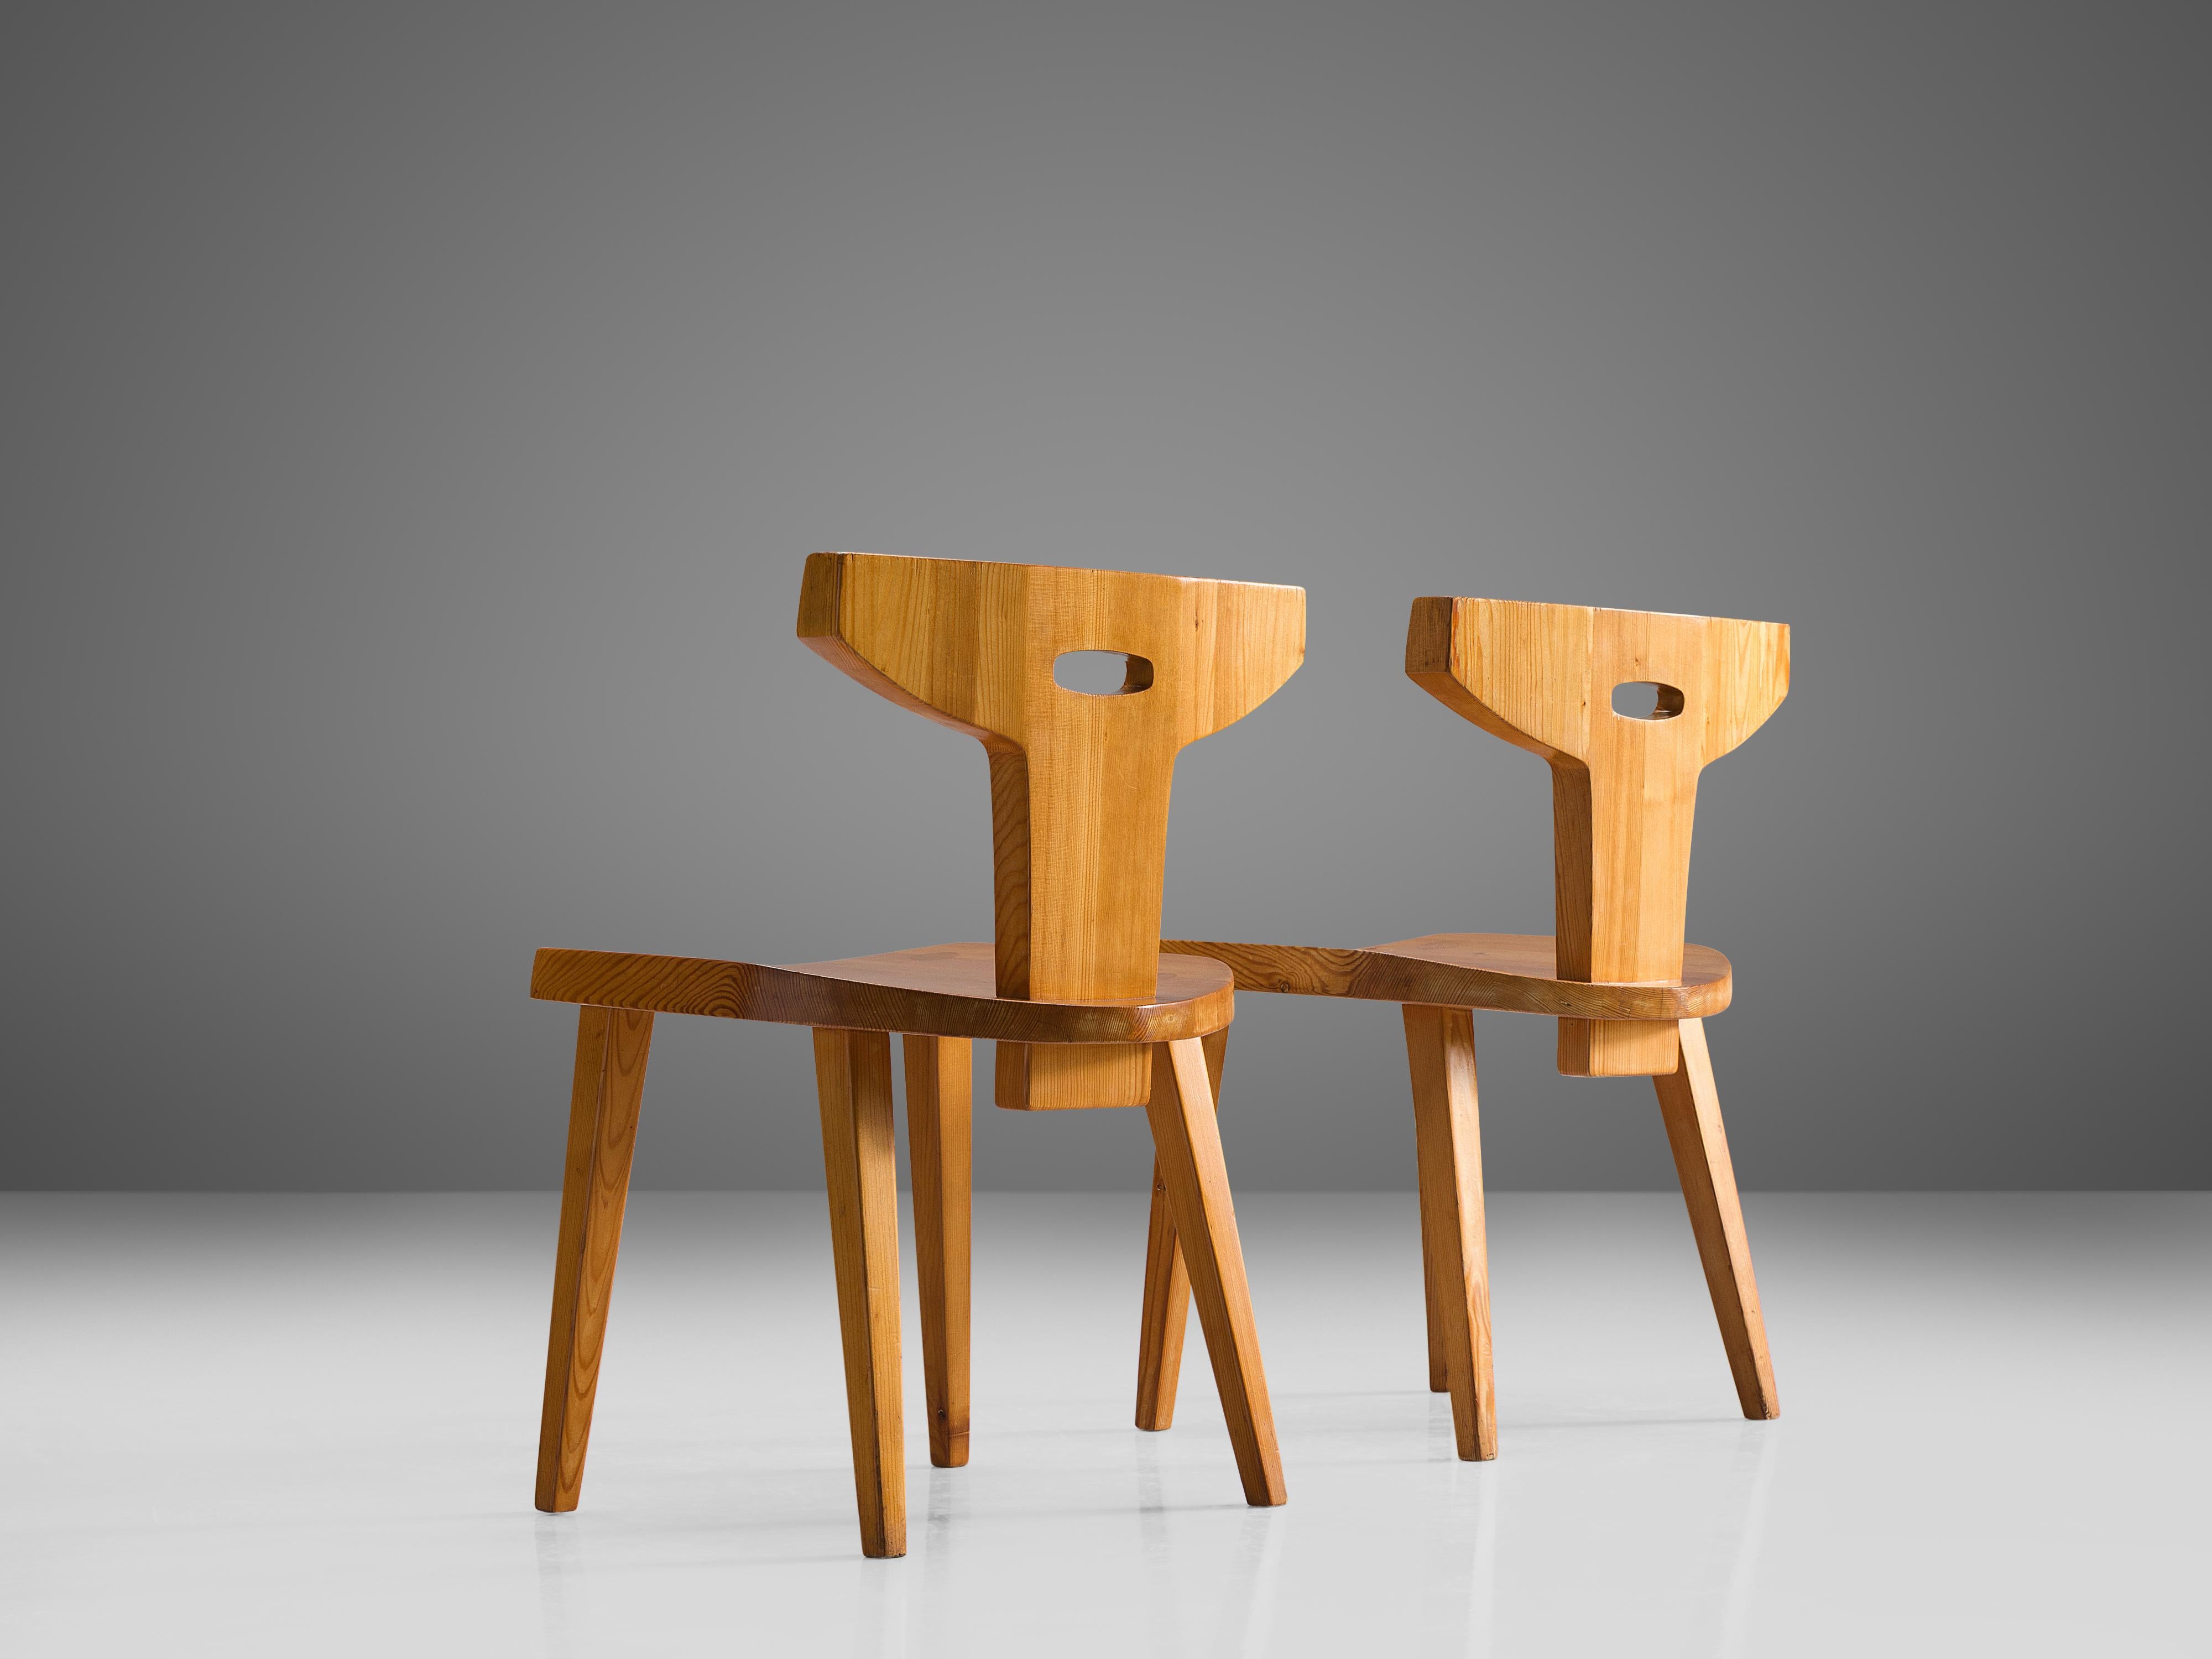 Mid-20th Century Jacob Kielland-Brandt Set of Four Dining Chairs in Solid Pine